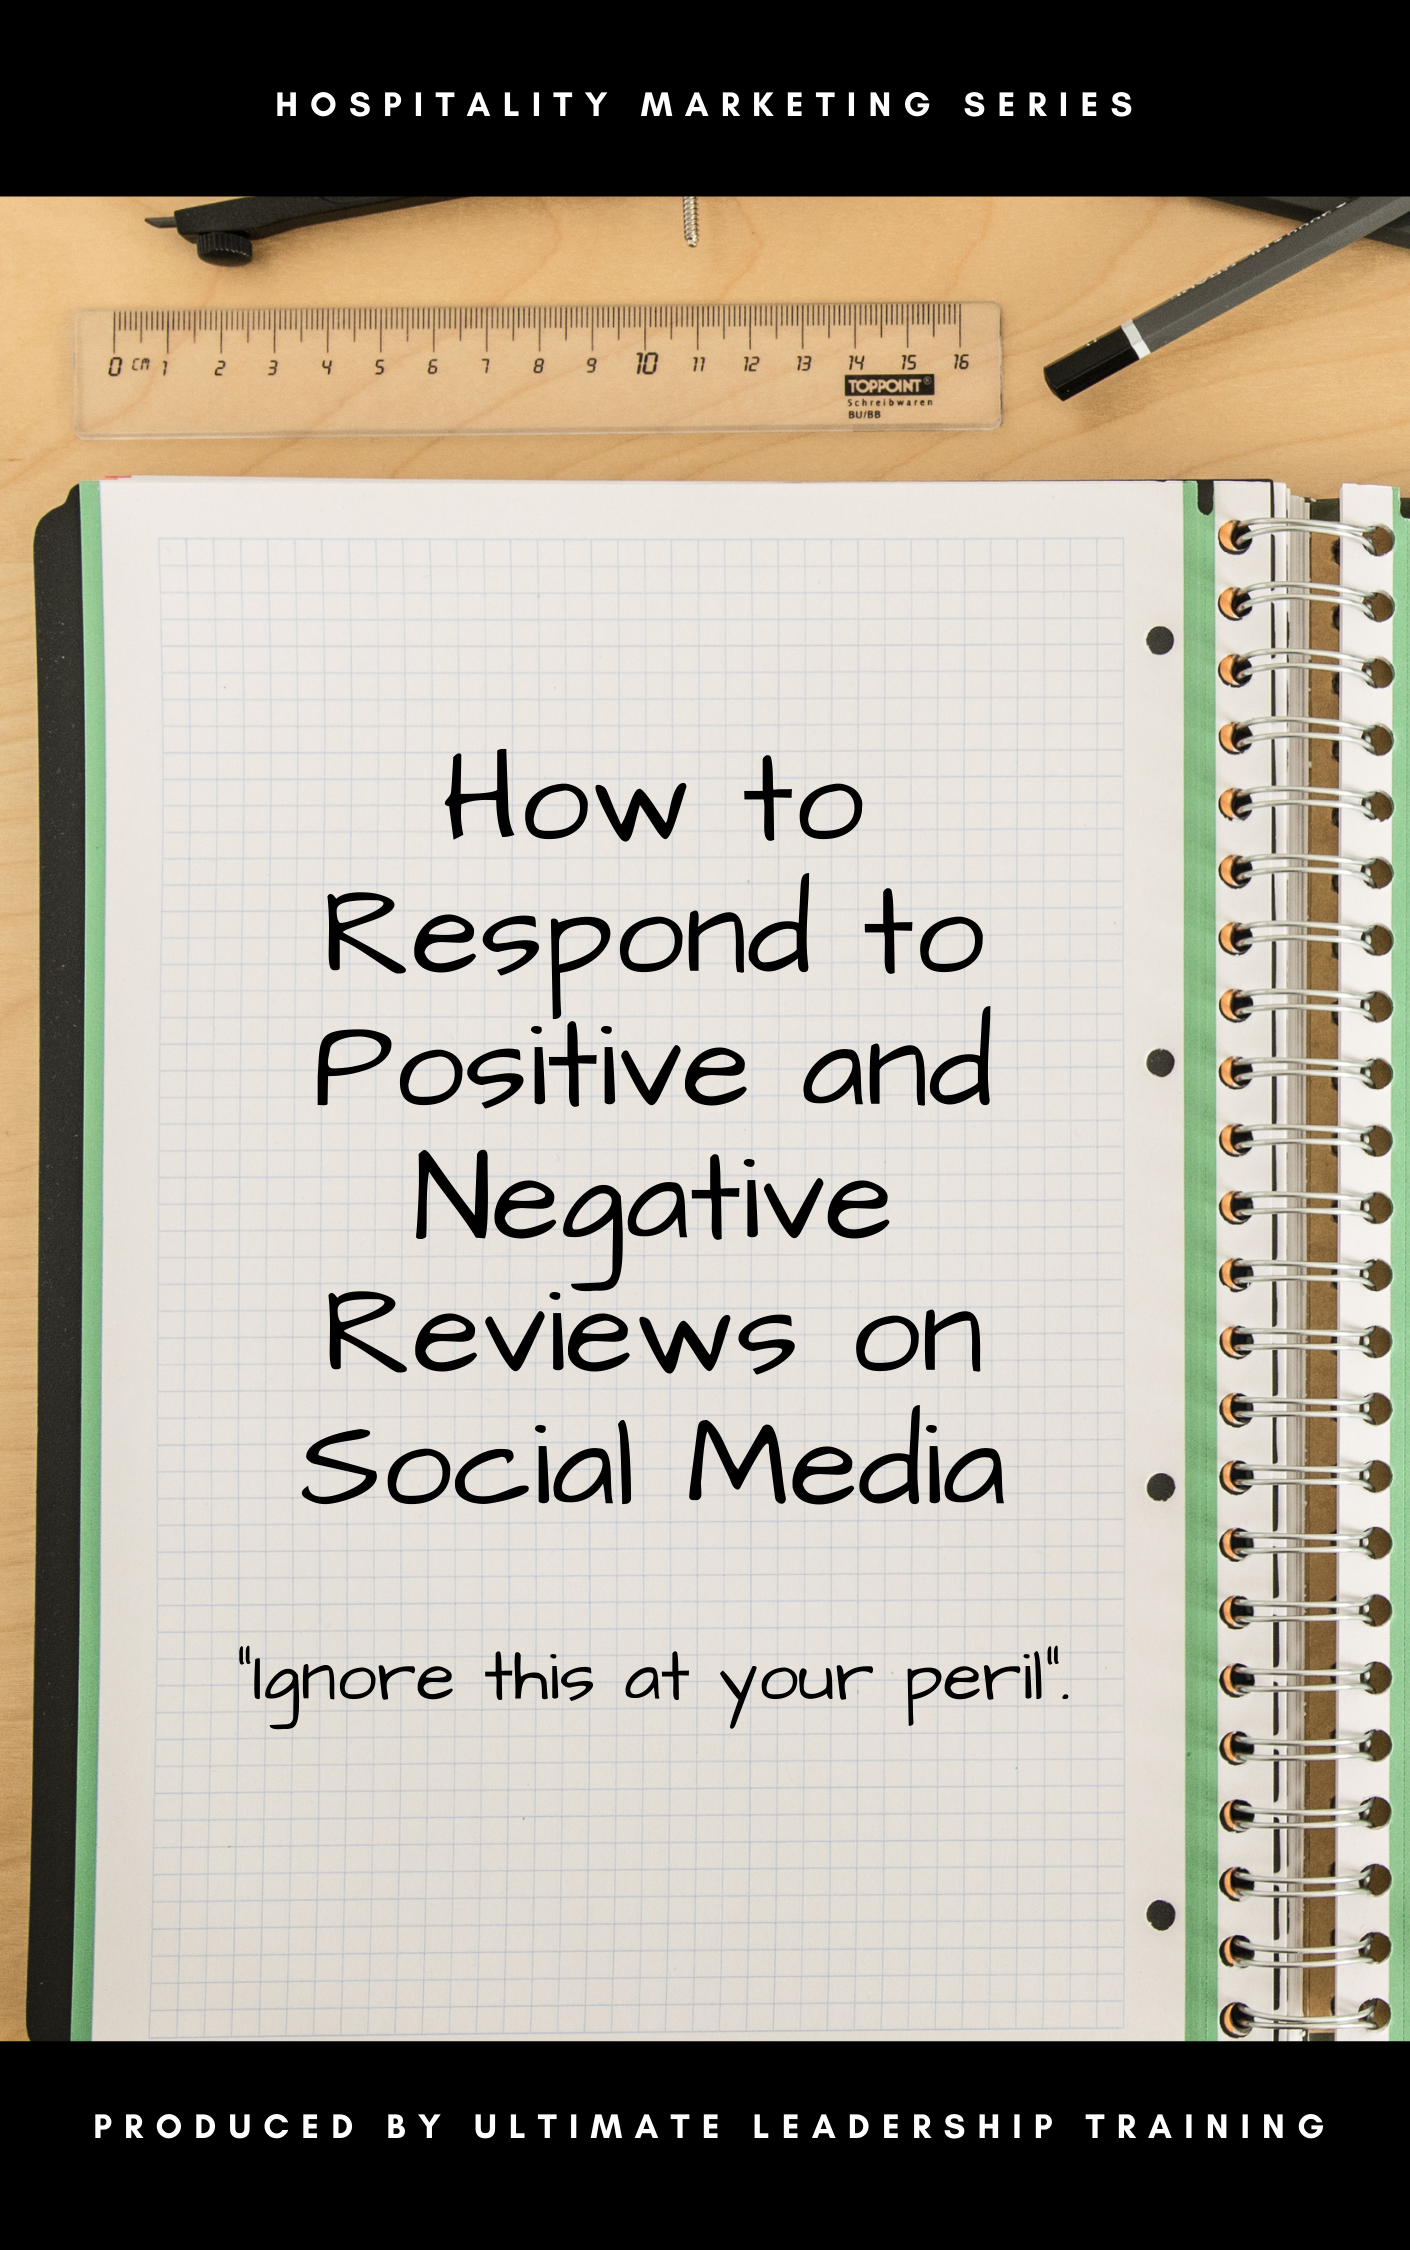 How to Respond to Reviews on Social Media